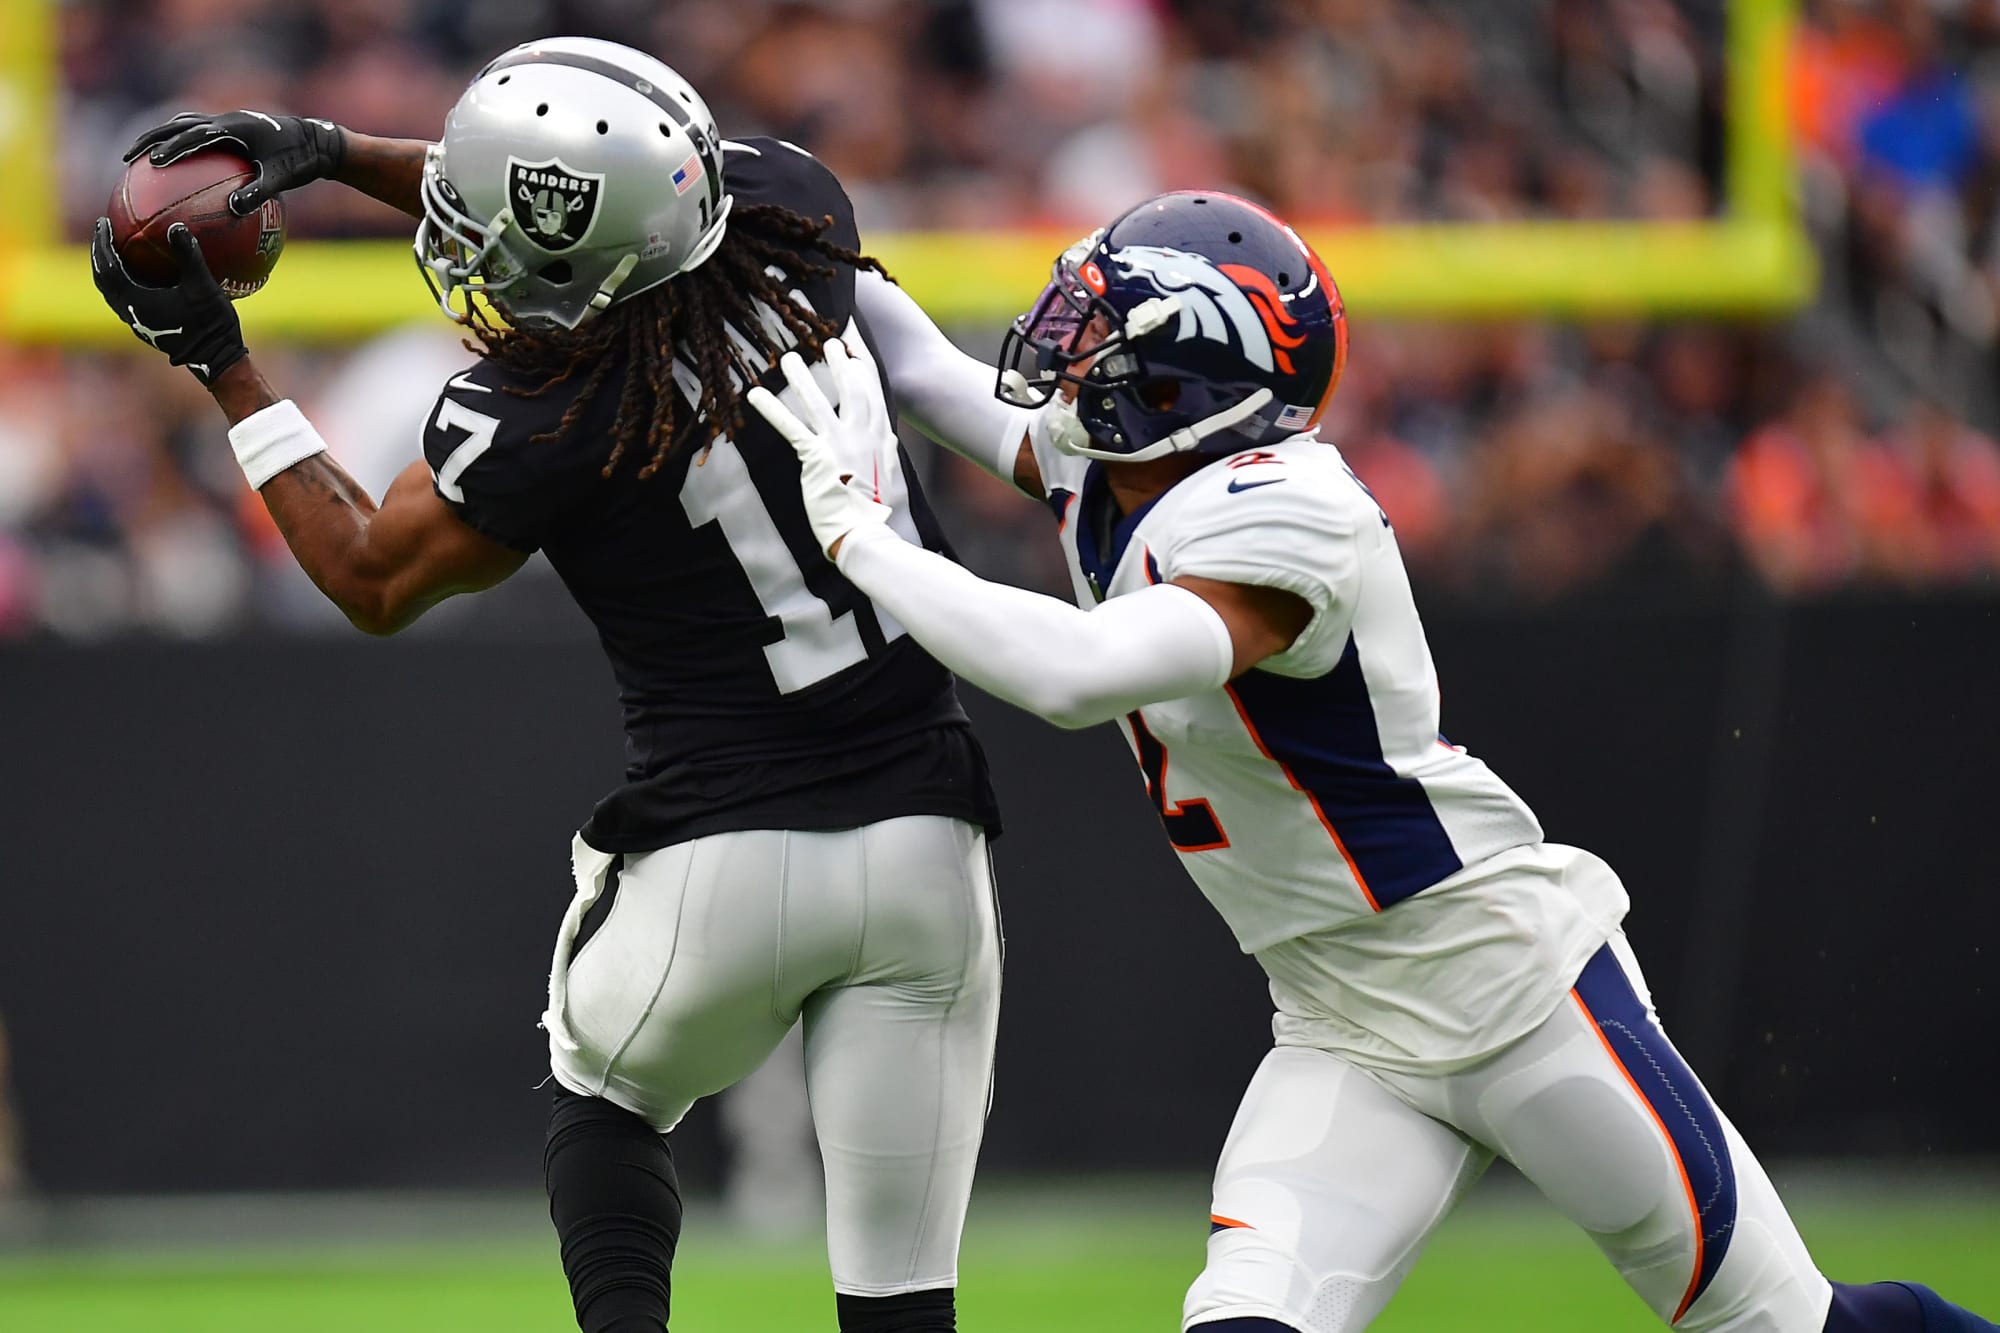 Denver Broncos vs Raiders was learning experience for Pat Surtain II